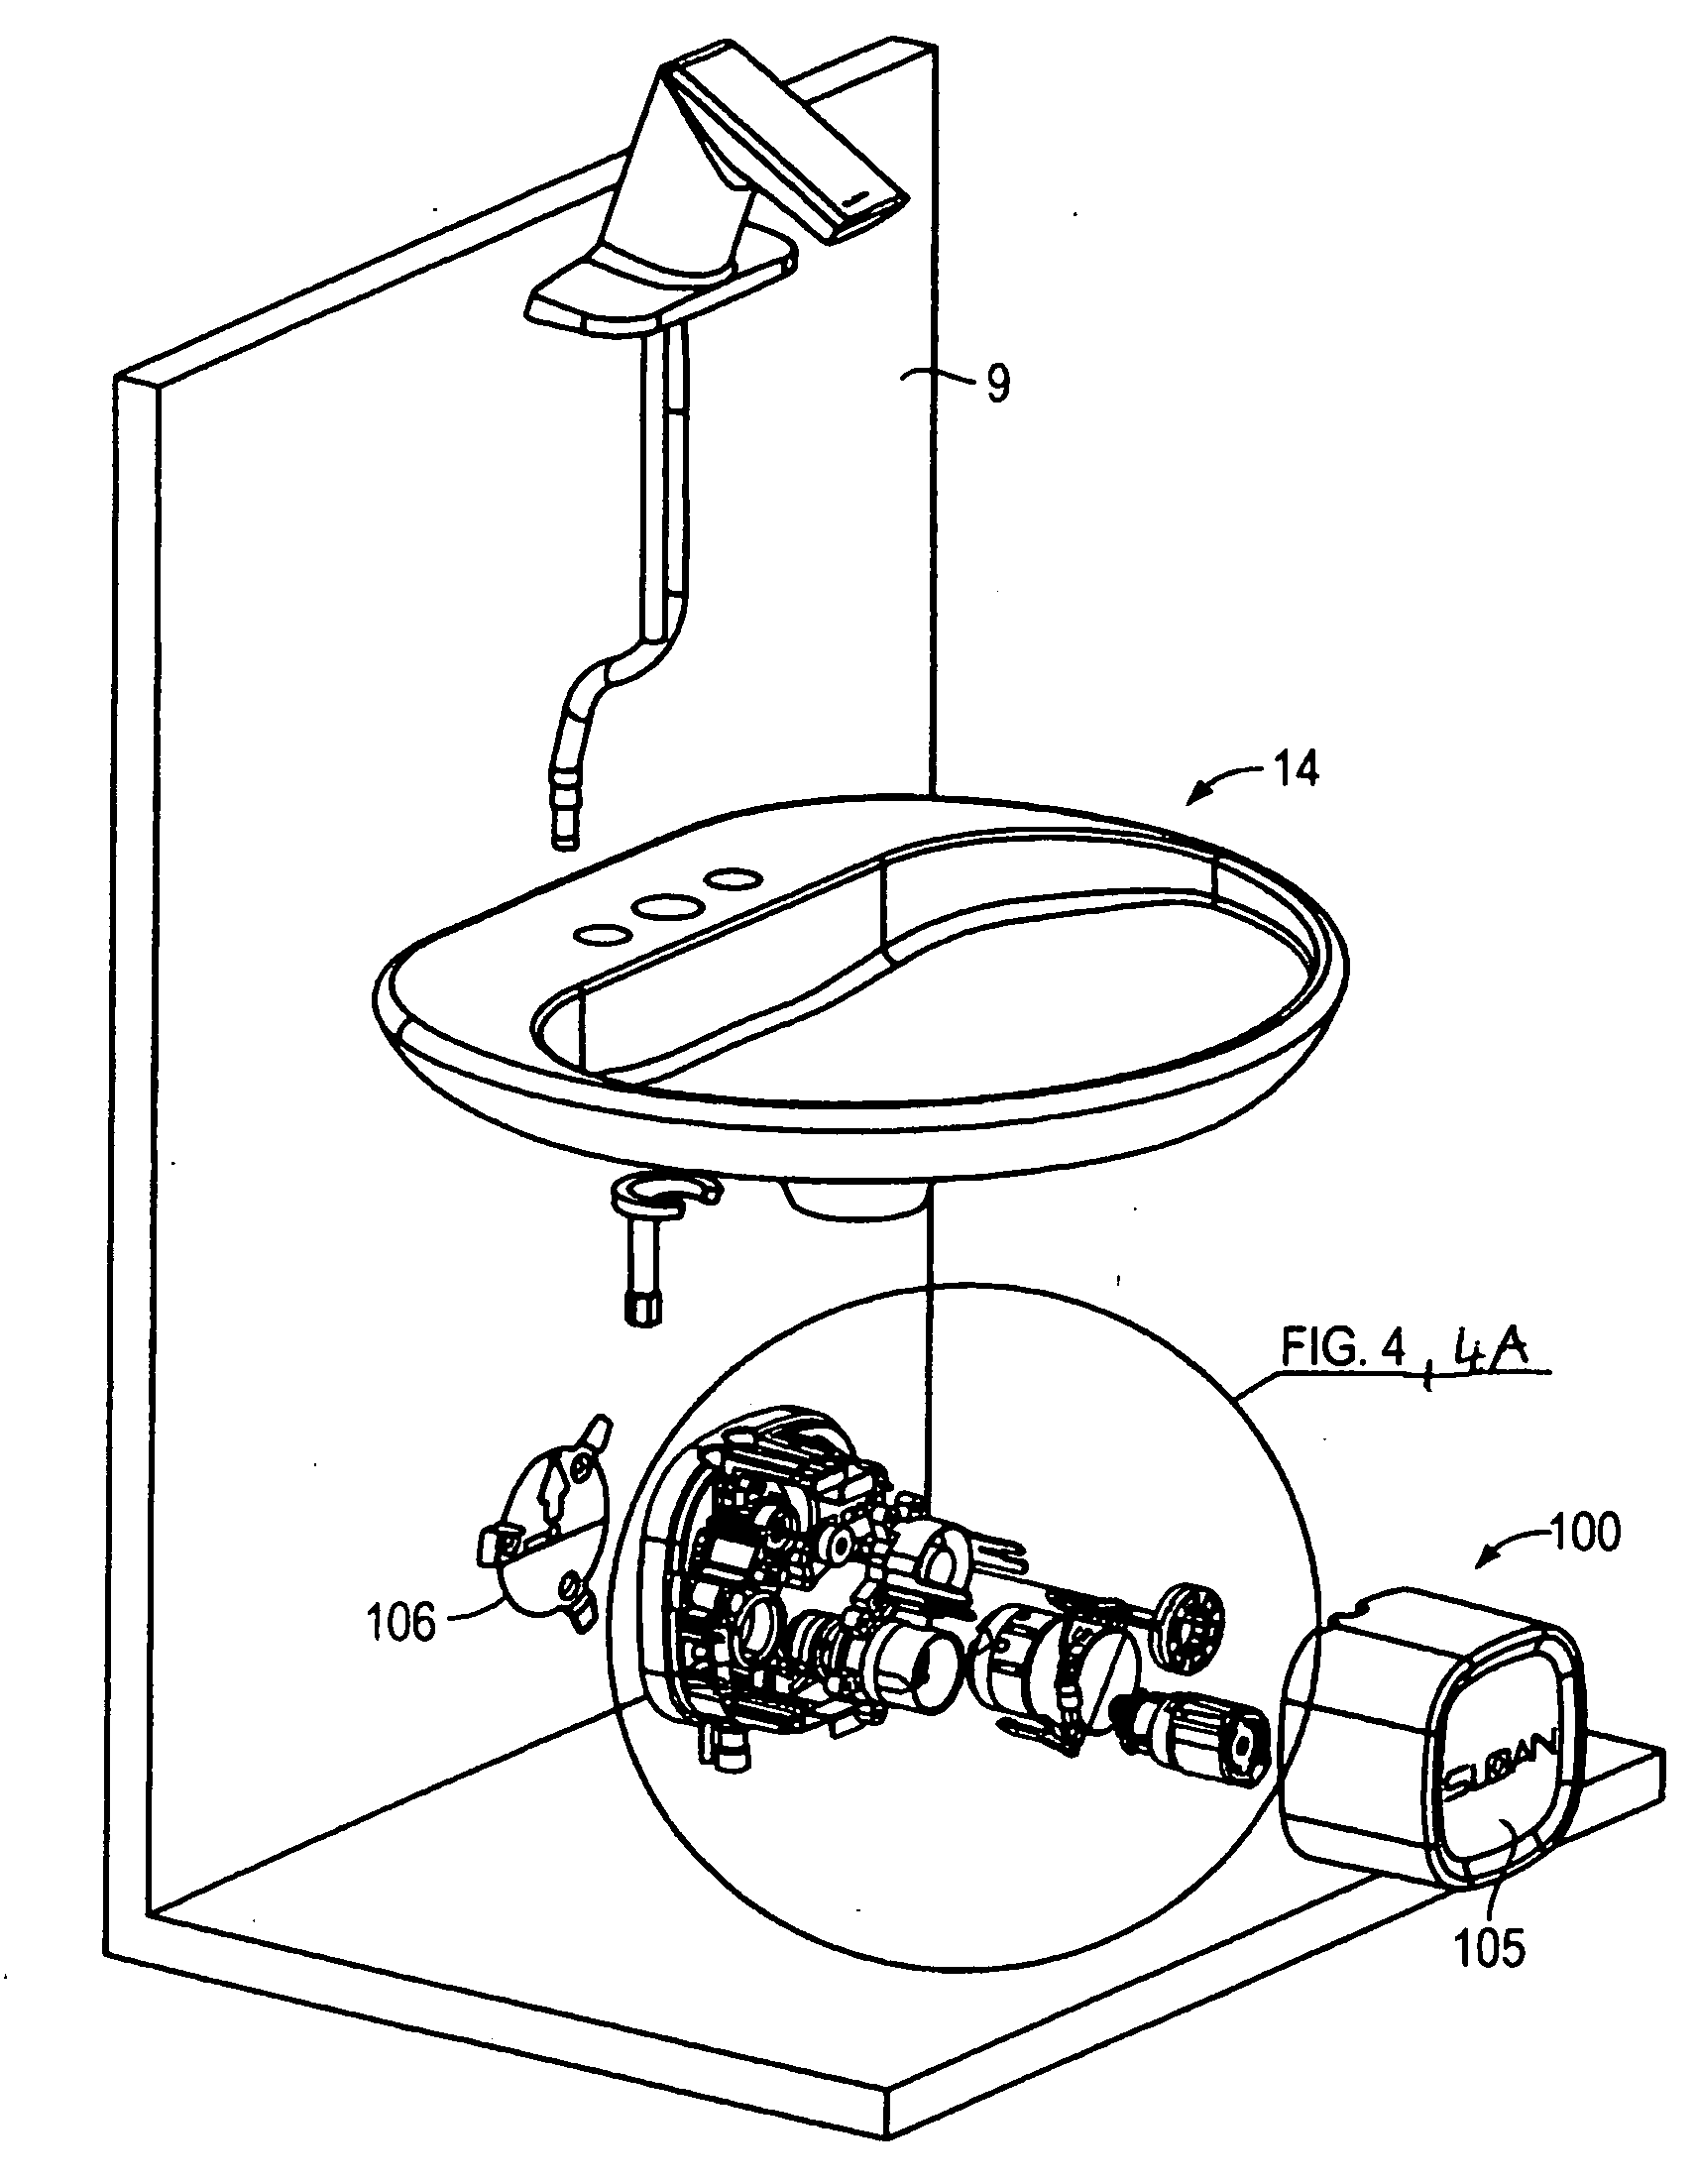 Automatic faucets